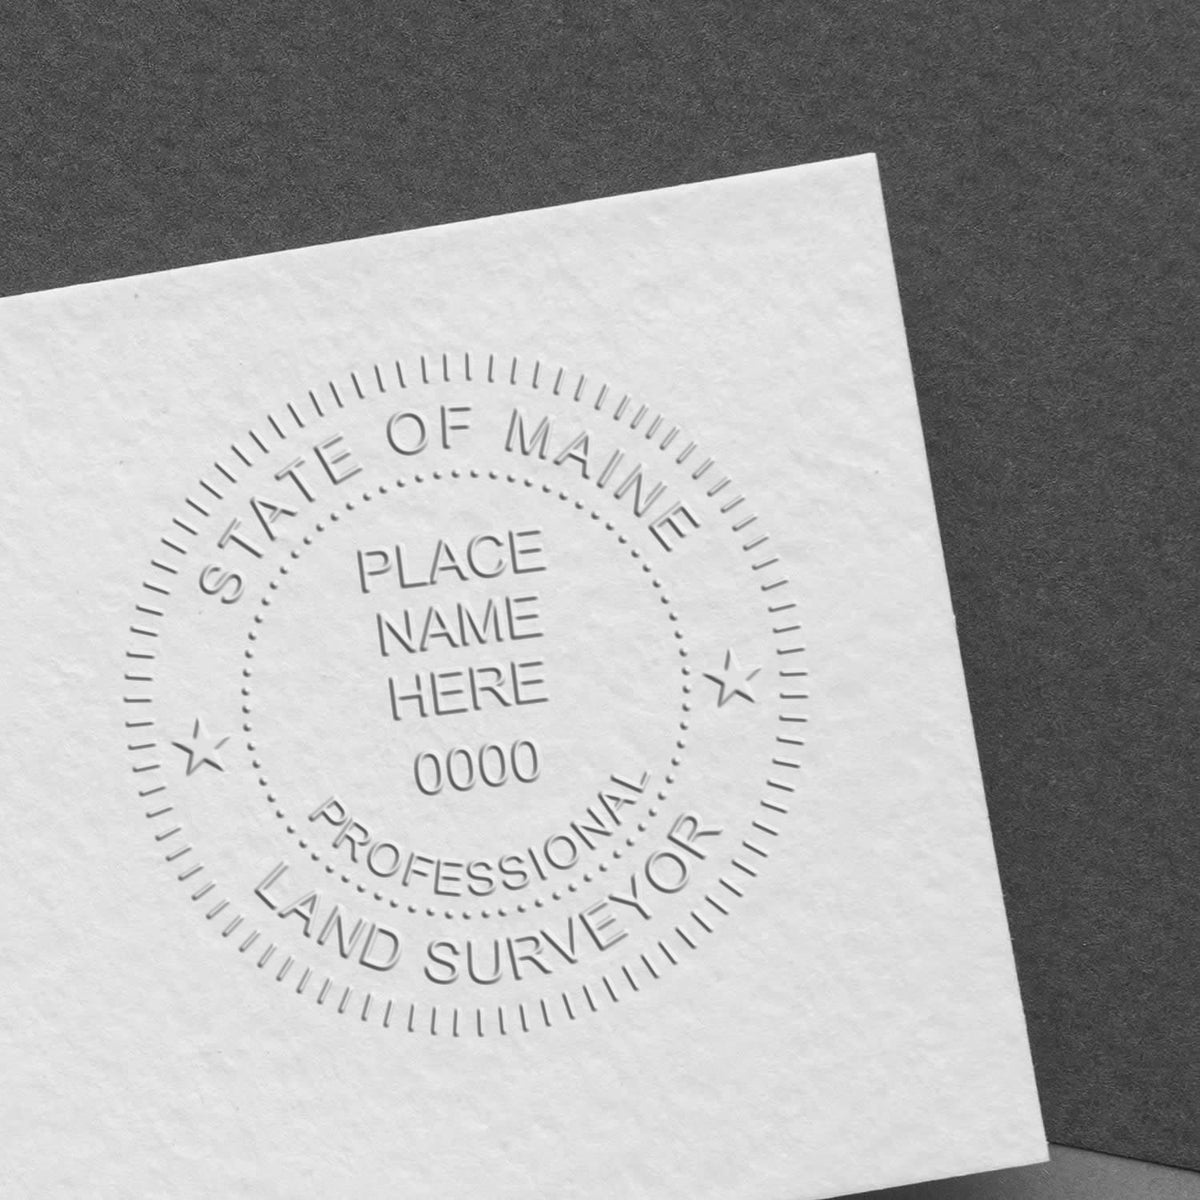 An alternative view of the Hybrid Maine Land Surveyor Seal stamped on a sheet of paper showing the image in use